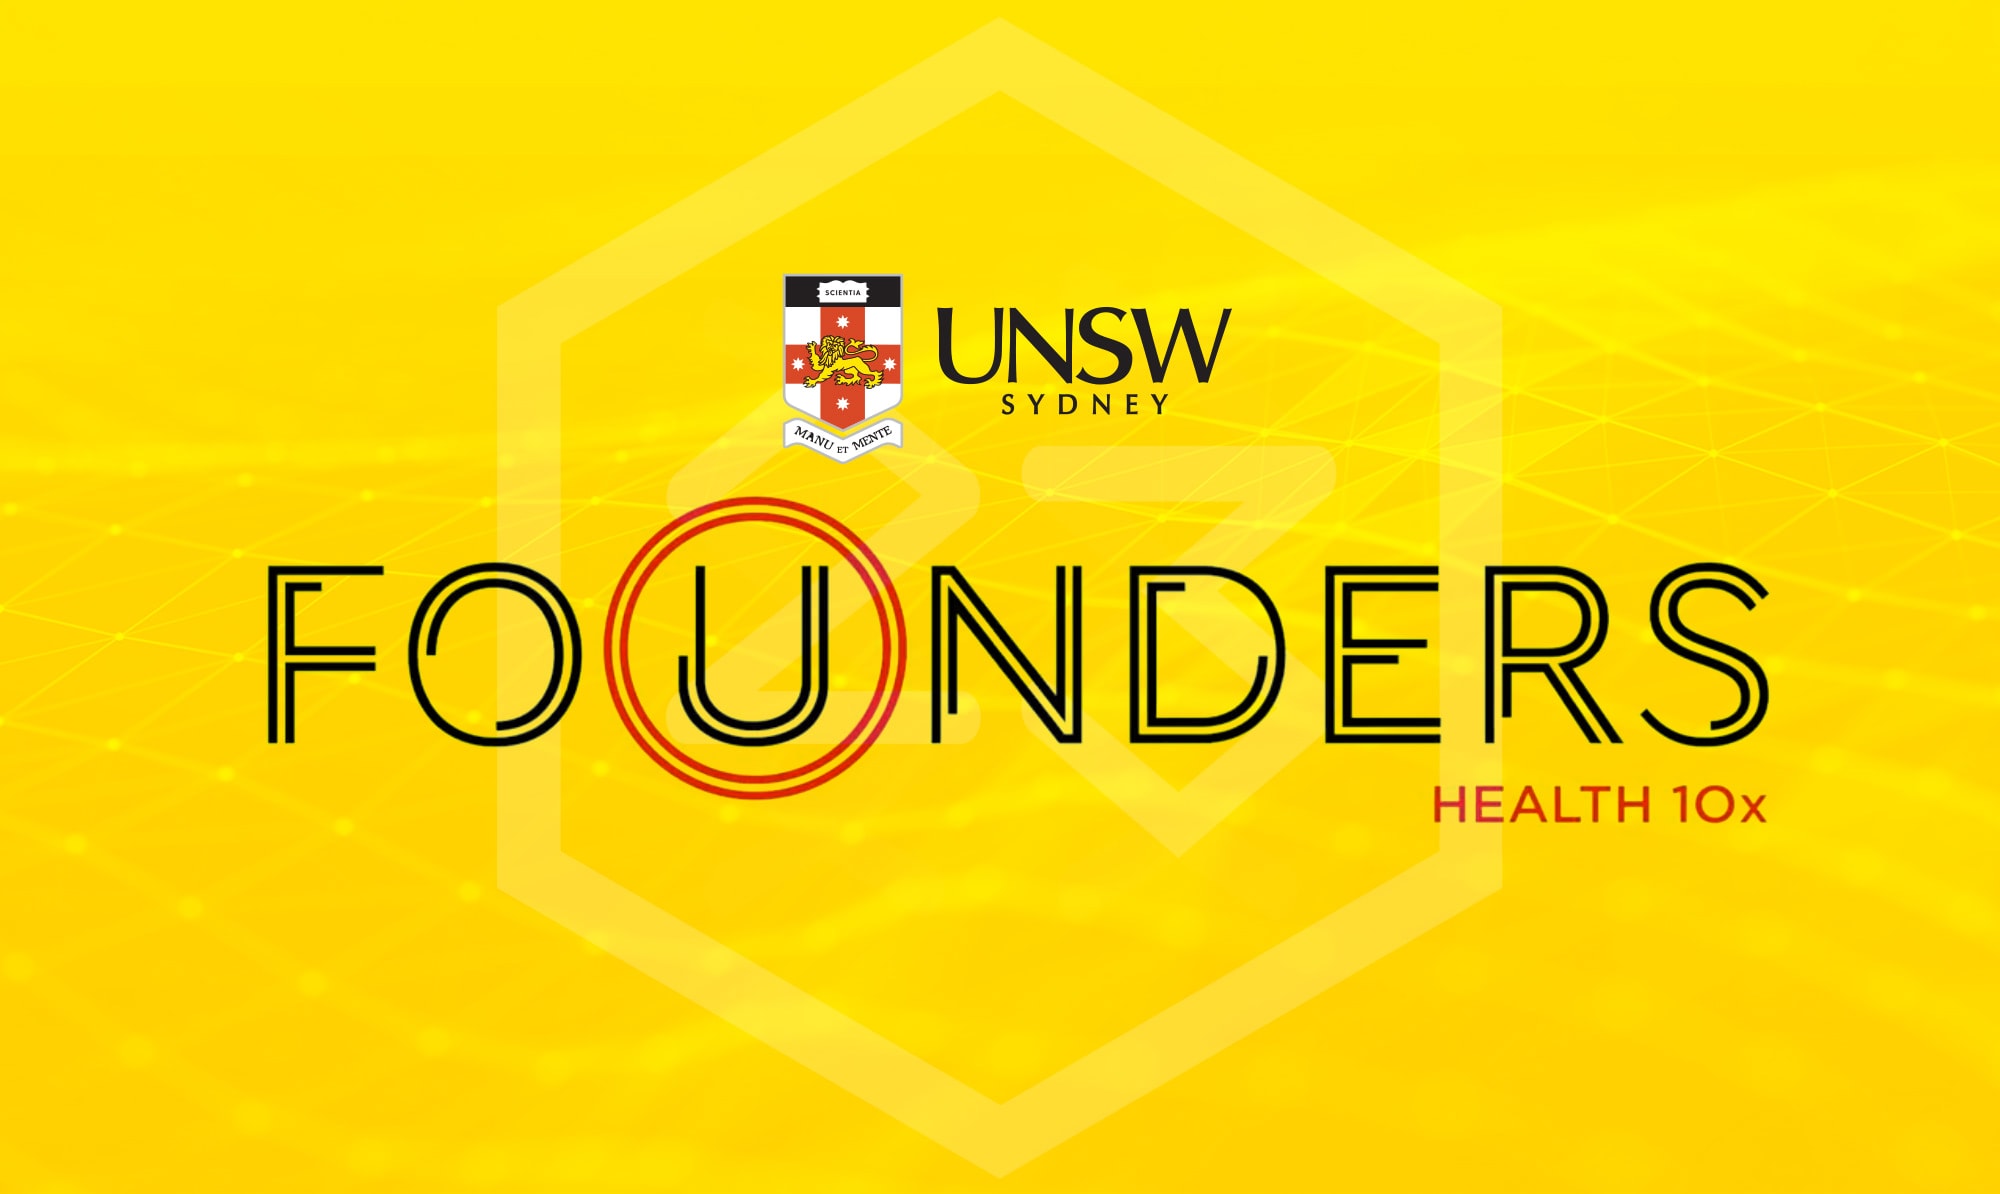 23Strands now part of the UNSW Founders (Health 10x Accelerator Programs) and The George Institute for Global Health 2020